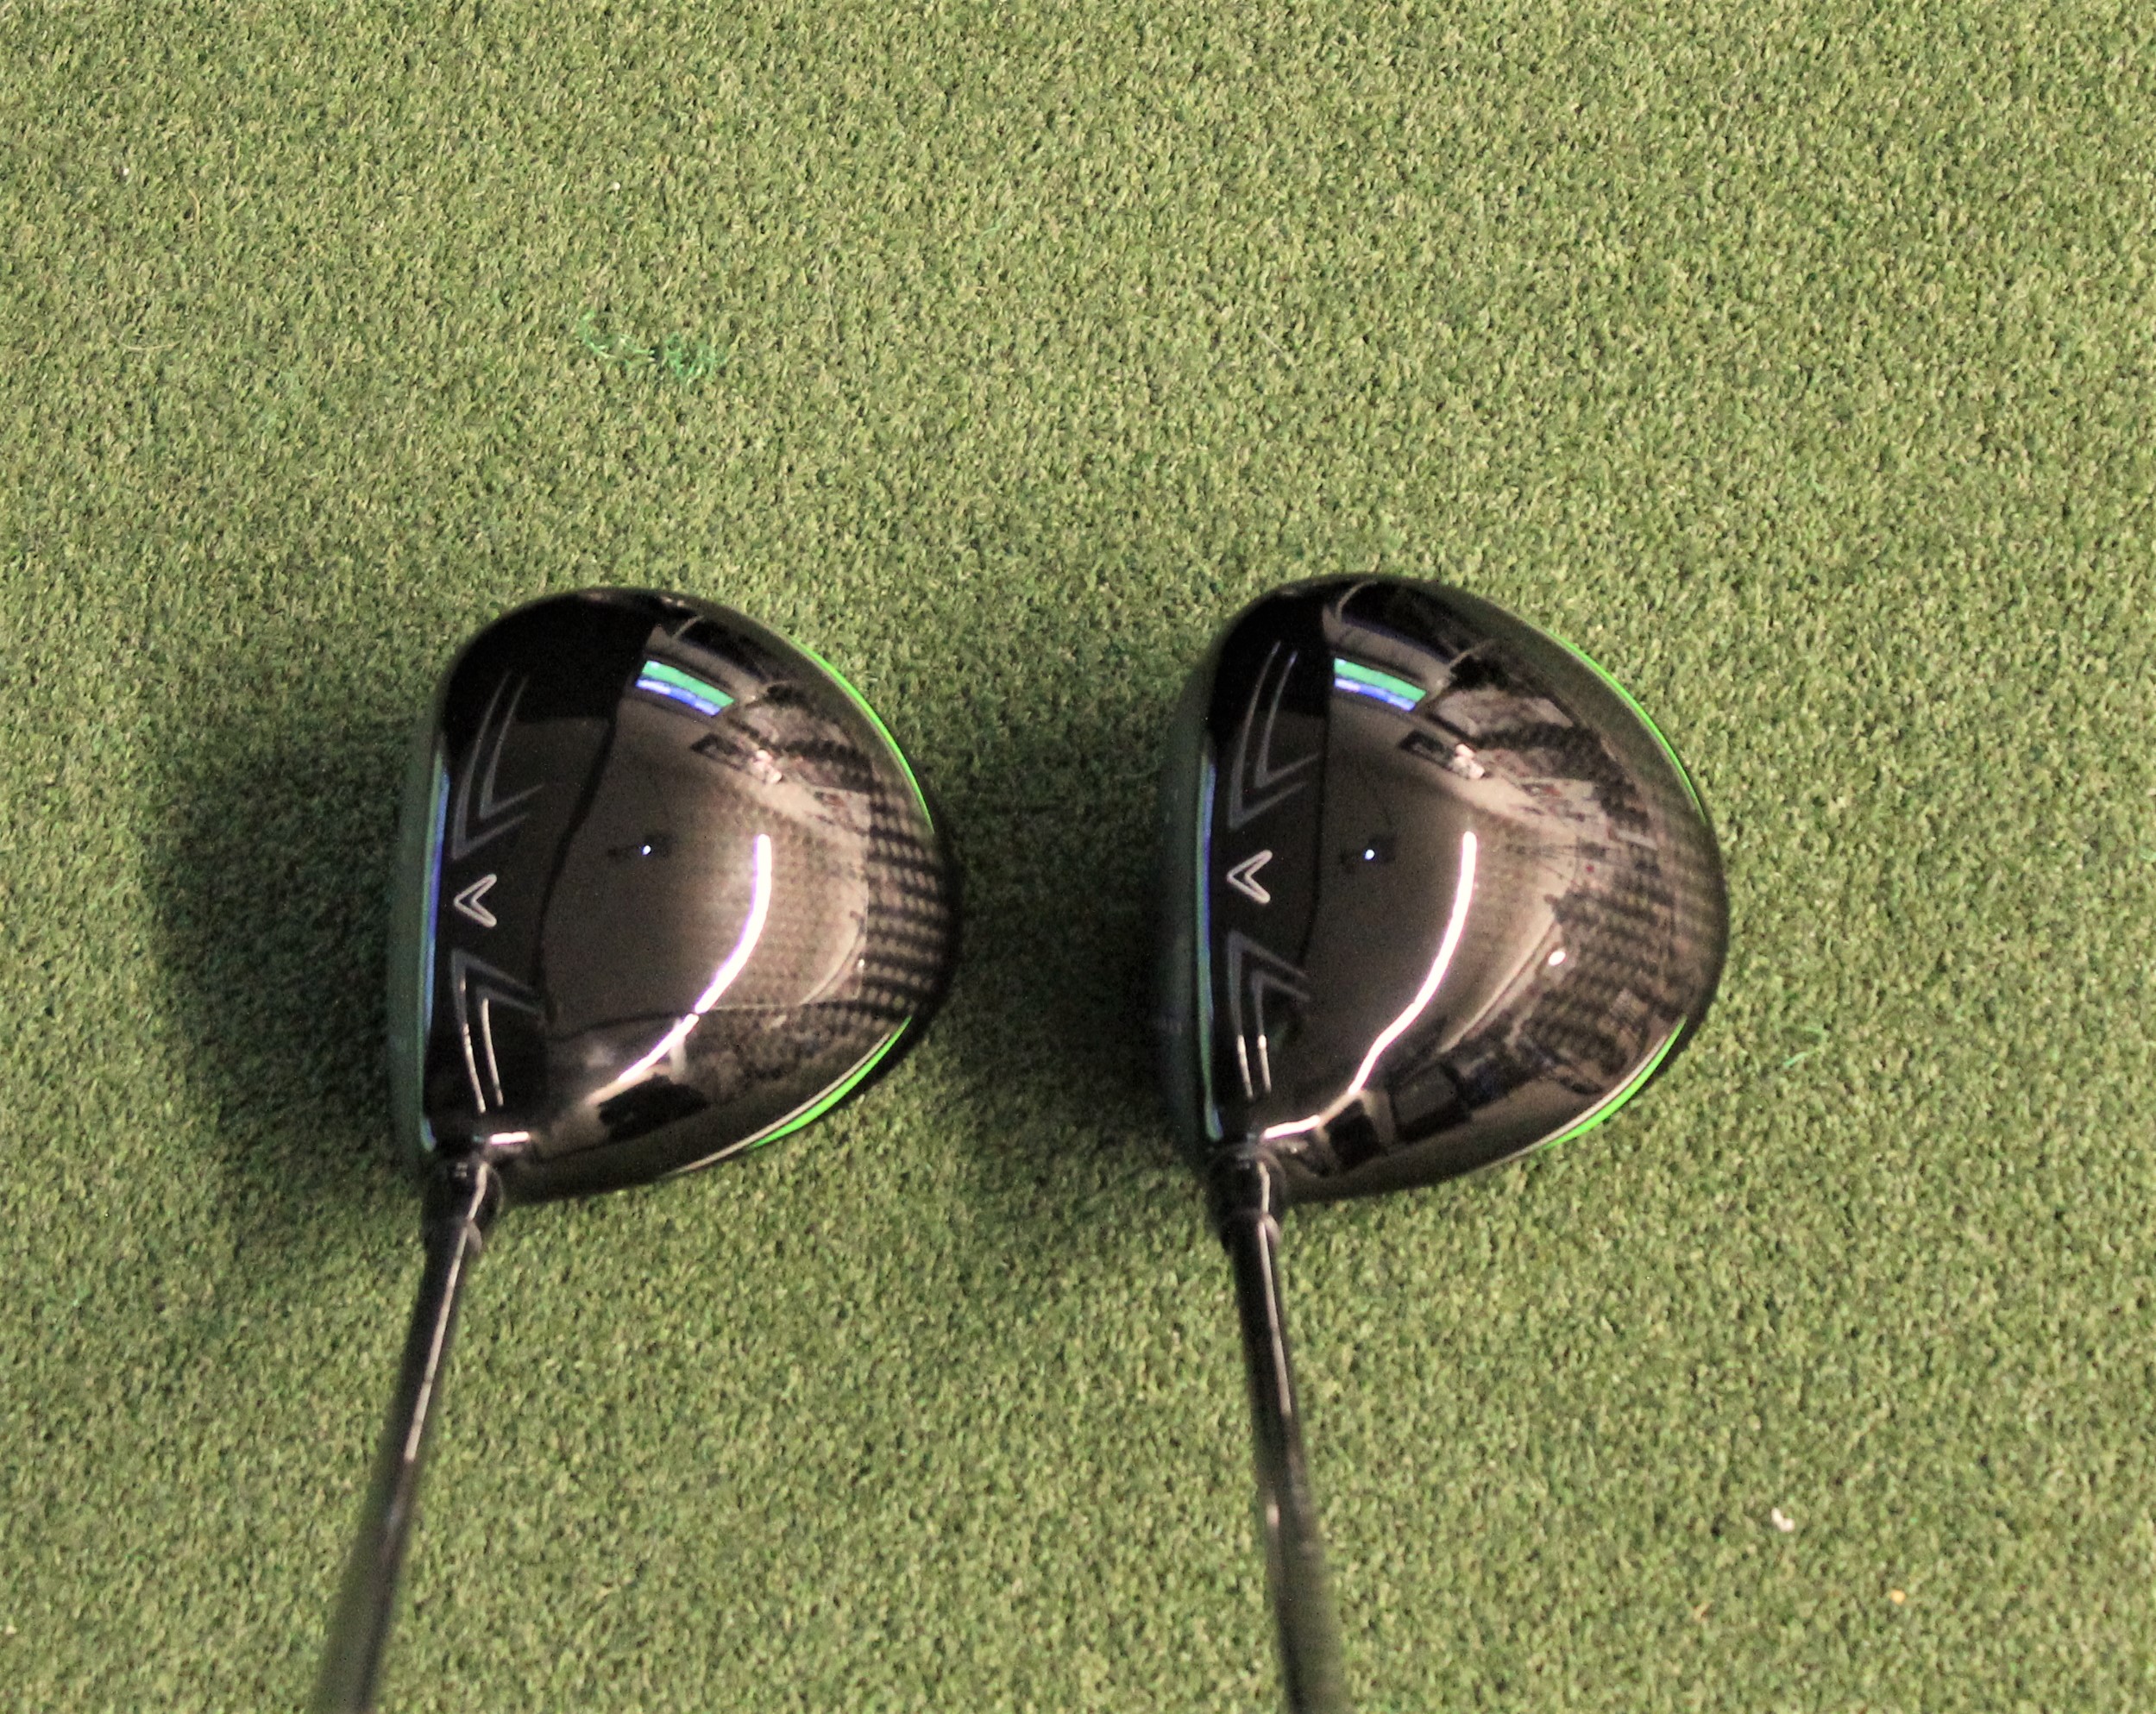 REVIEW: Callaway Golf GBB Epic, GBB Epic Sub Zero drivers